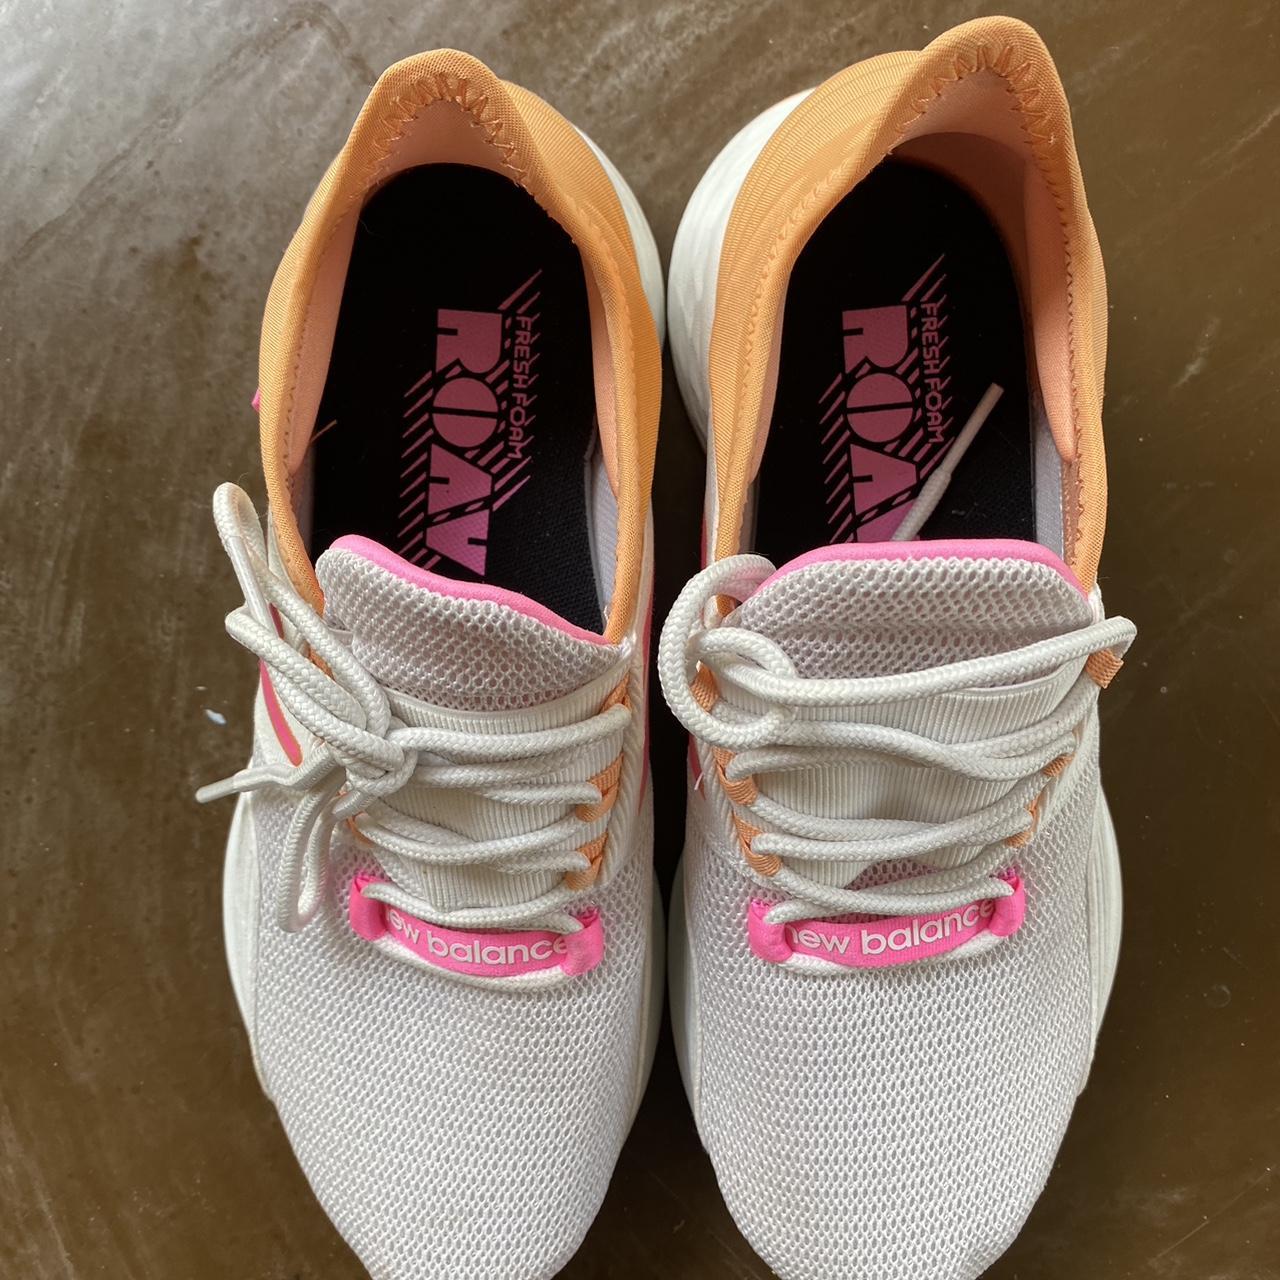 New Balance Women's White and Pink Trainers (3)